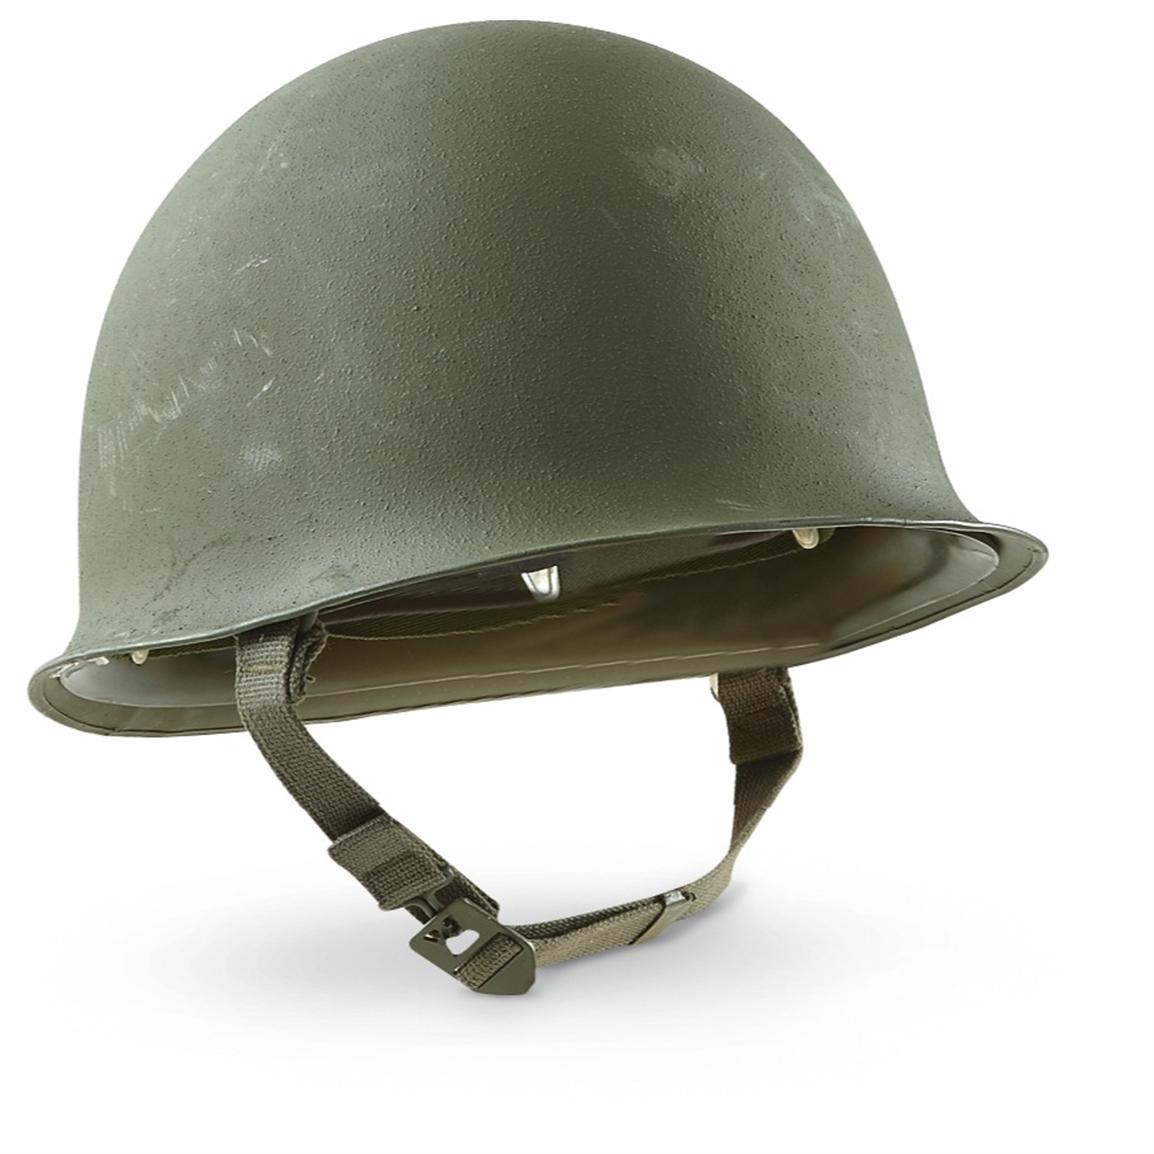 French Military  Surplus M51 Helmet  with Liner Used 